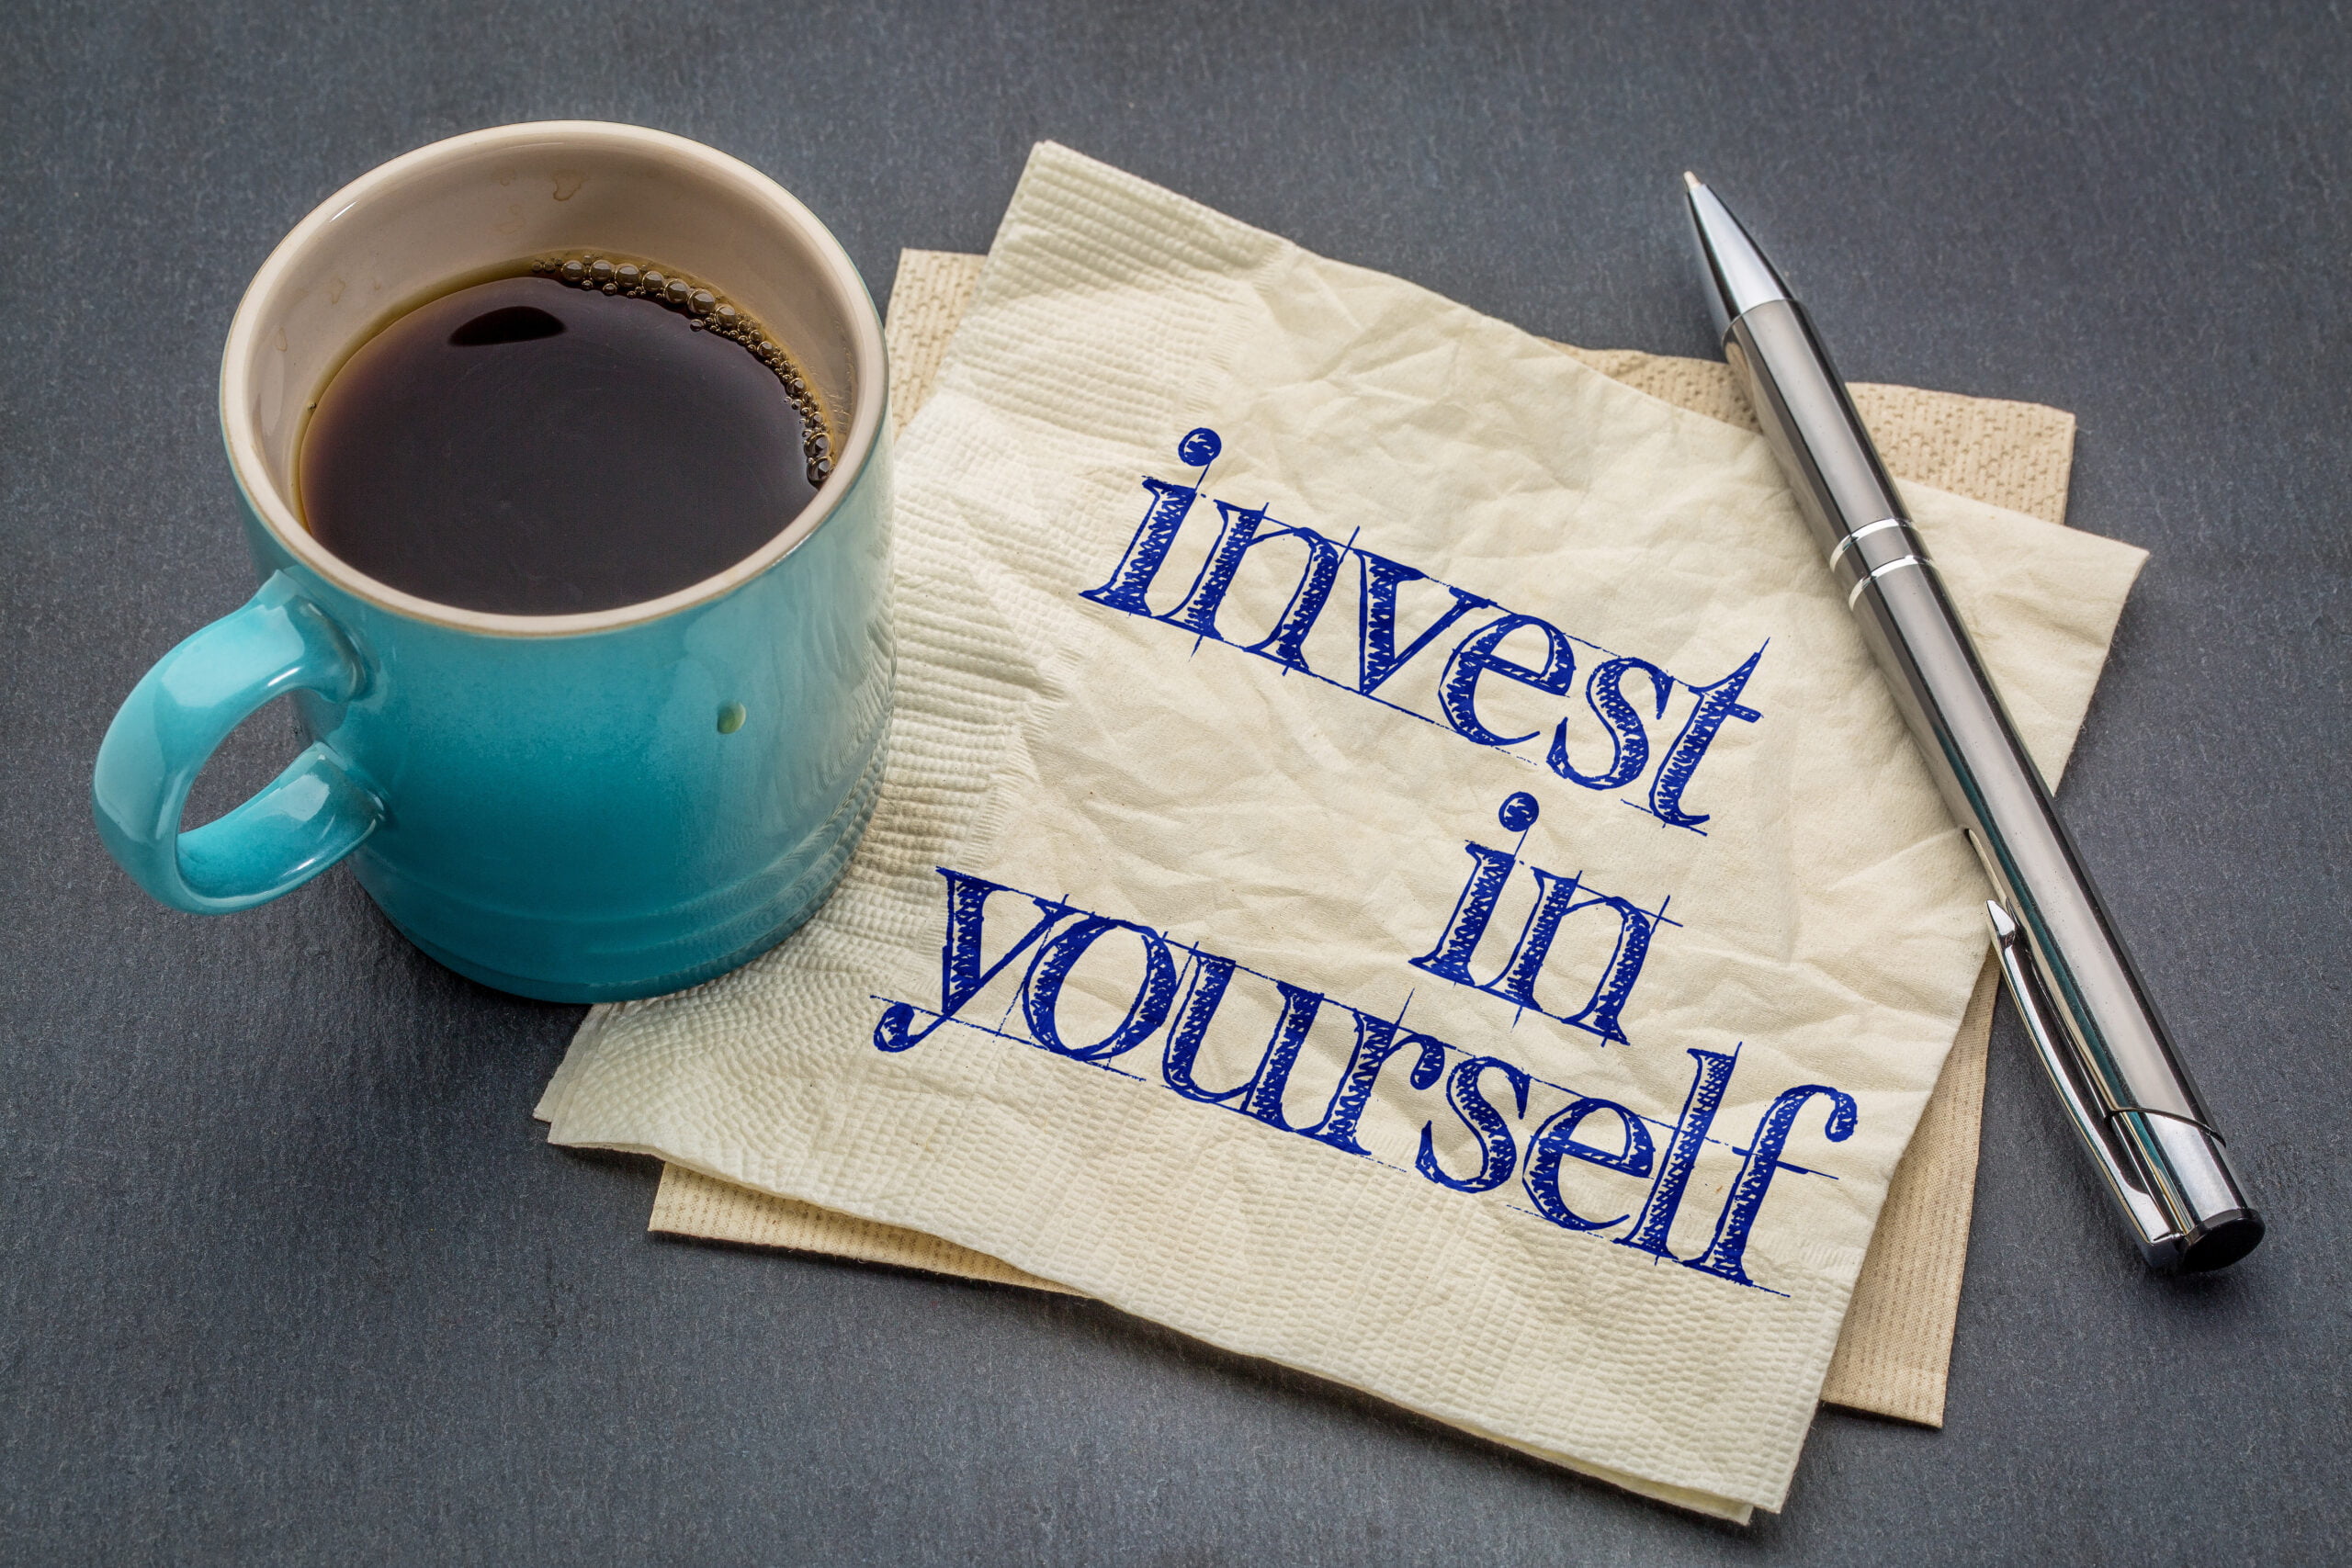 invest in yourself